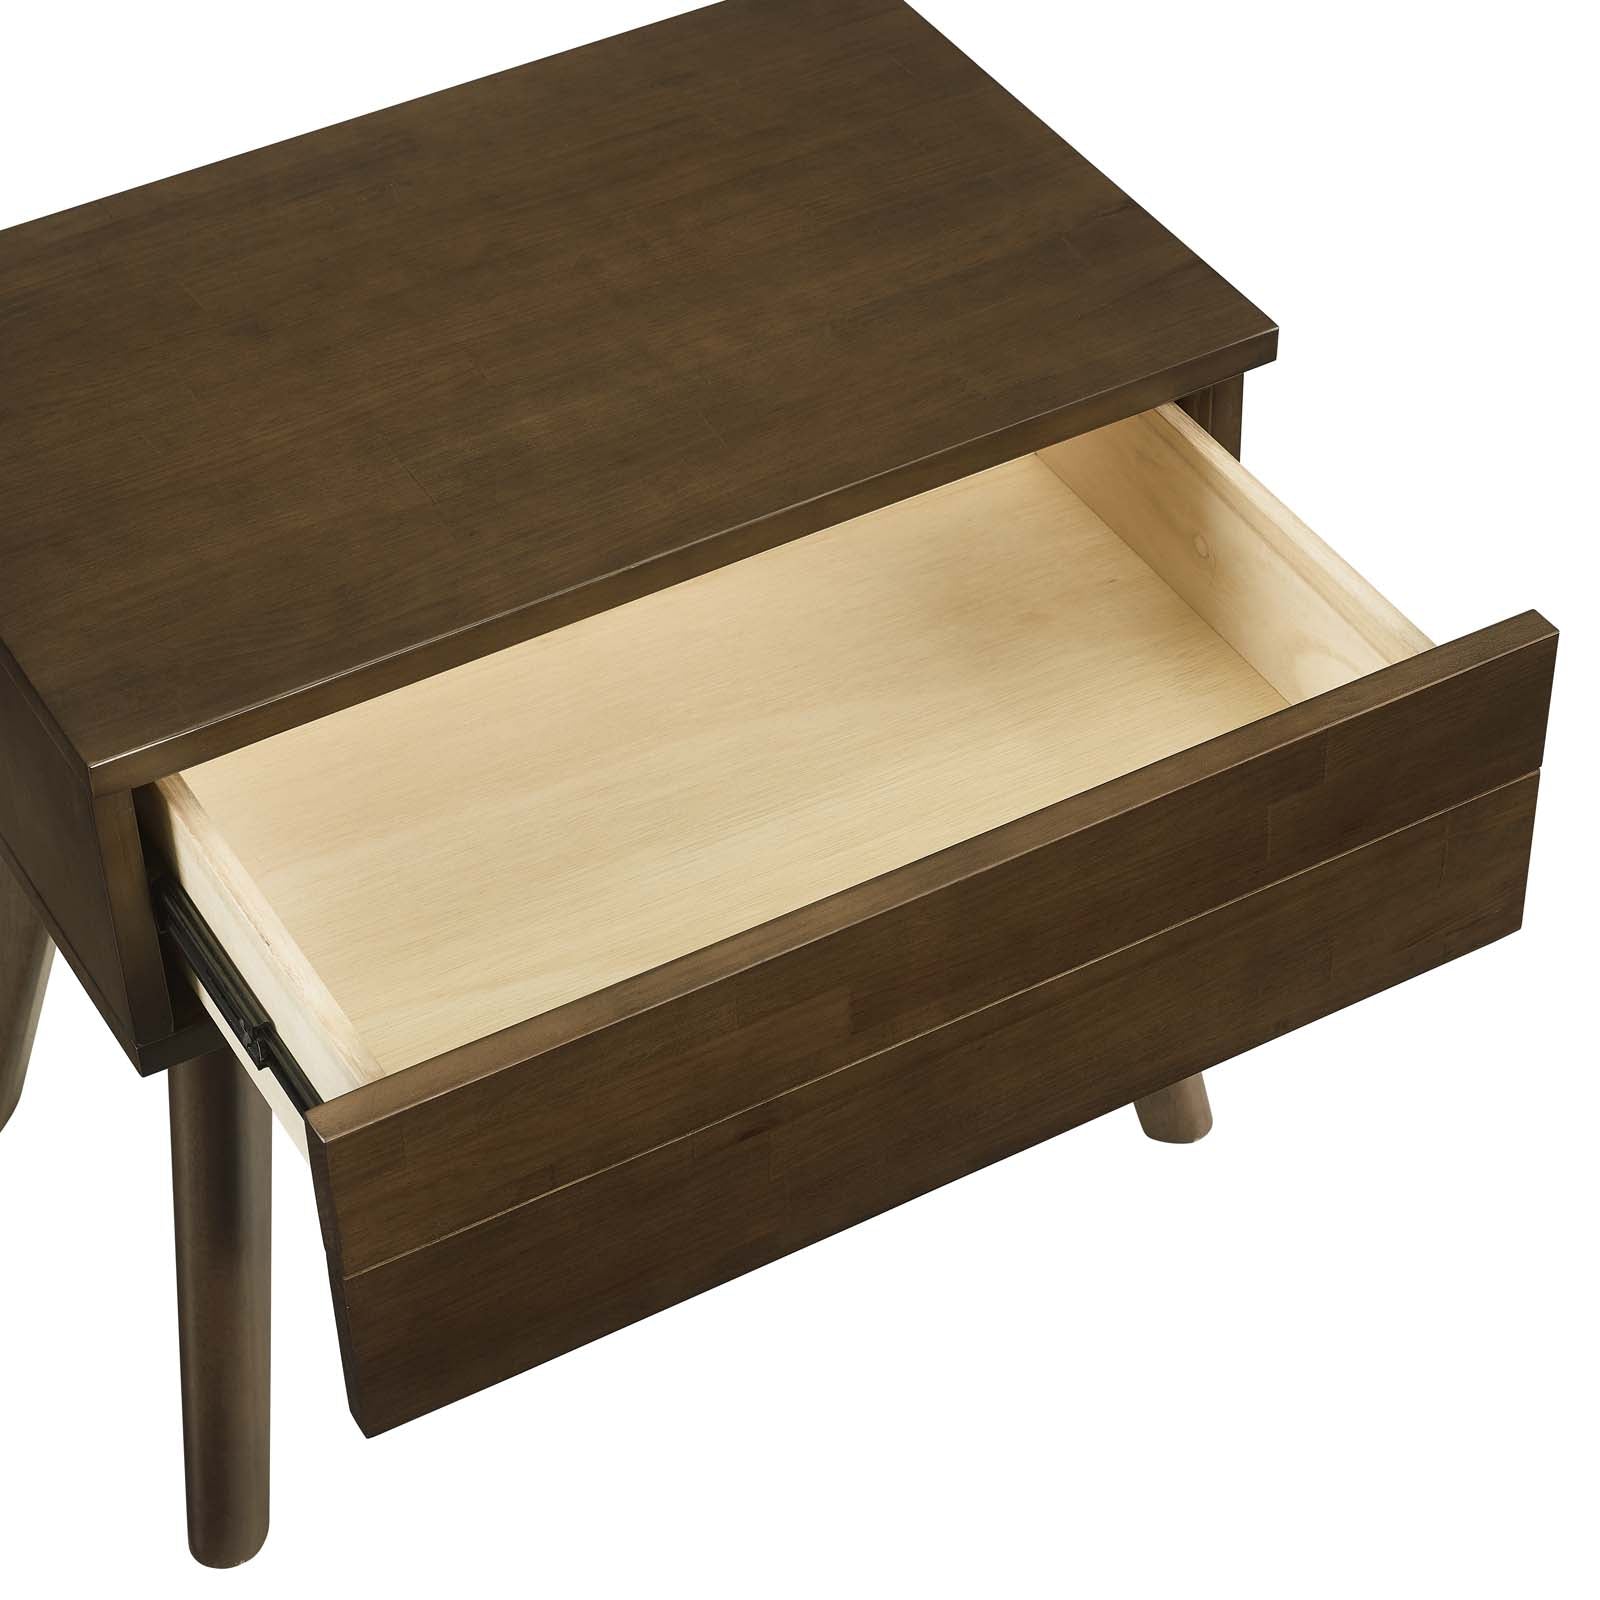 Modway Nightstands & Side Tables - Everly Wood Nightstand Walnut